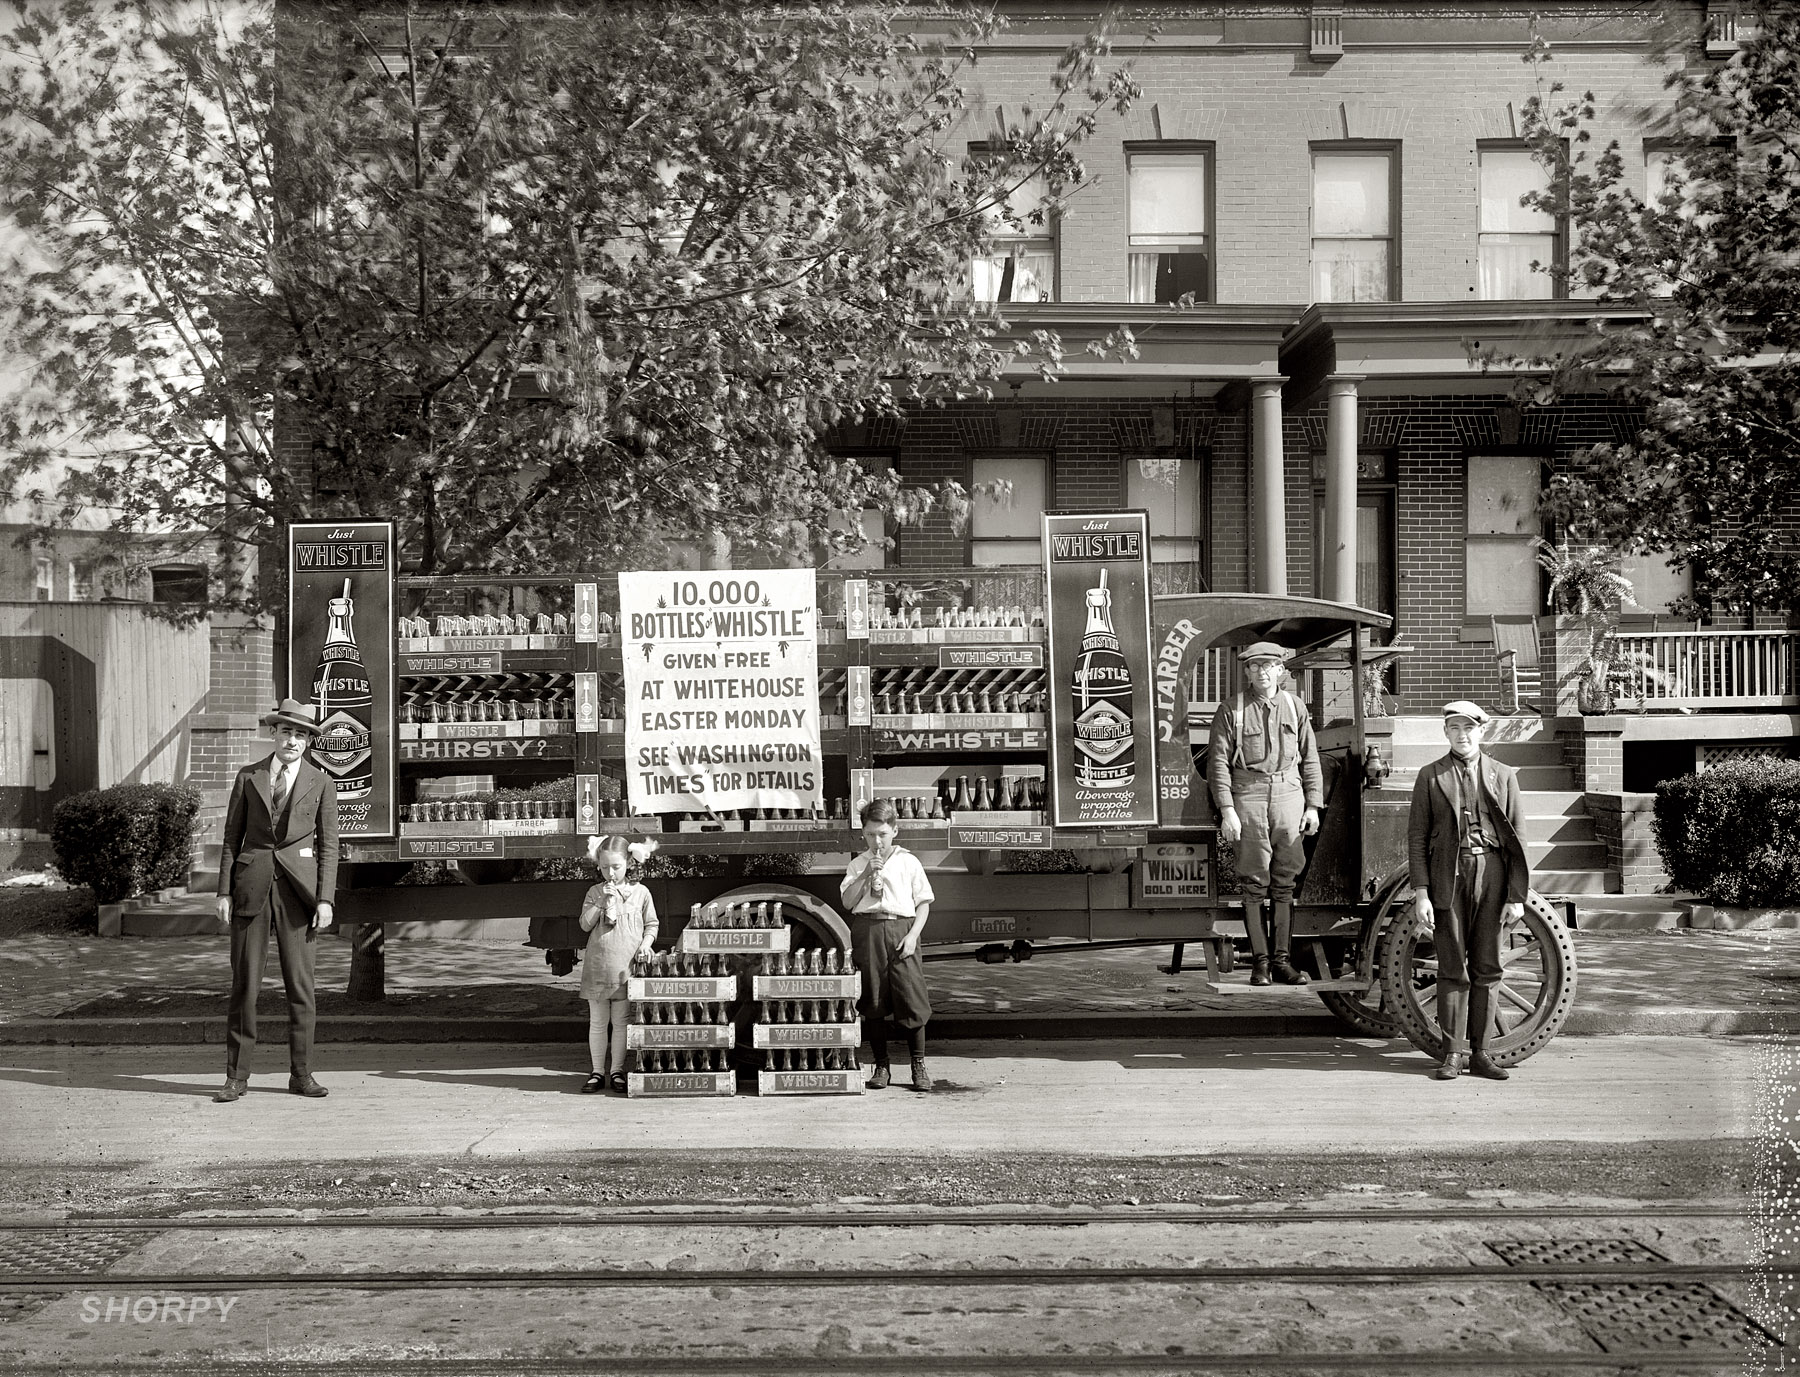 Washington, D.C., 1921. "Whistle car." A truck filled with Whistle, the "beverage wrapped in bottles." National Photo Company glass negative. View full size.